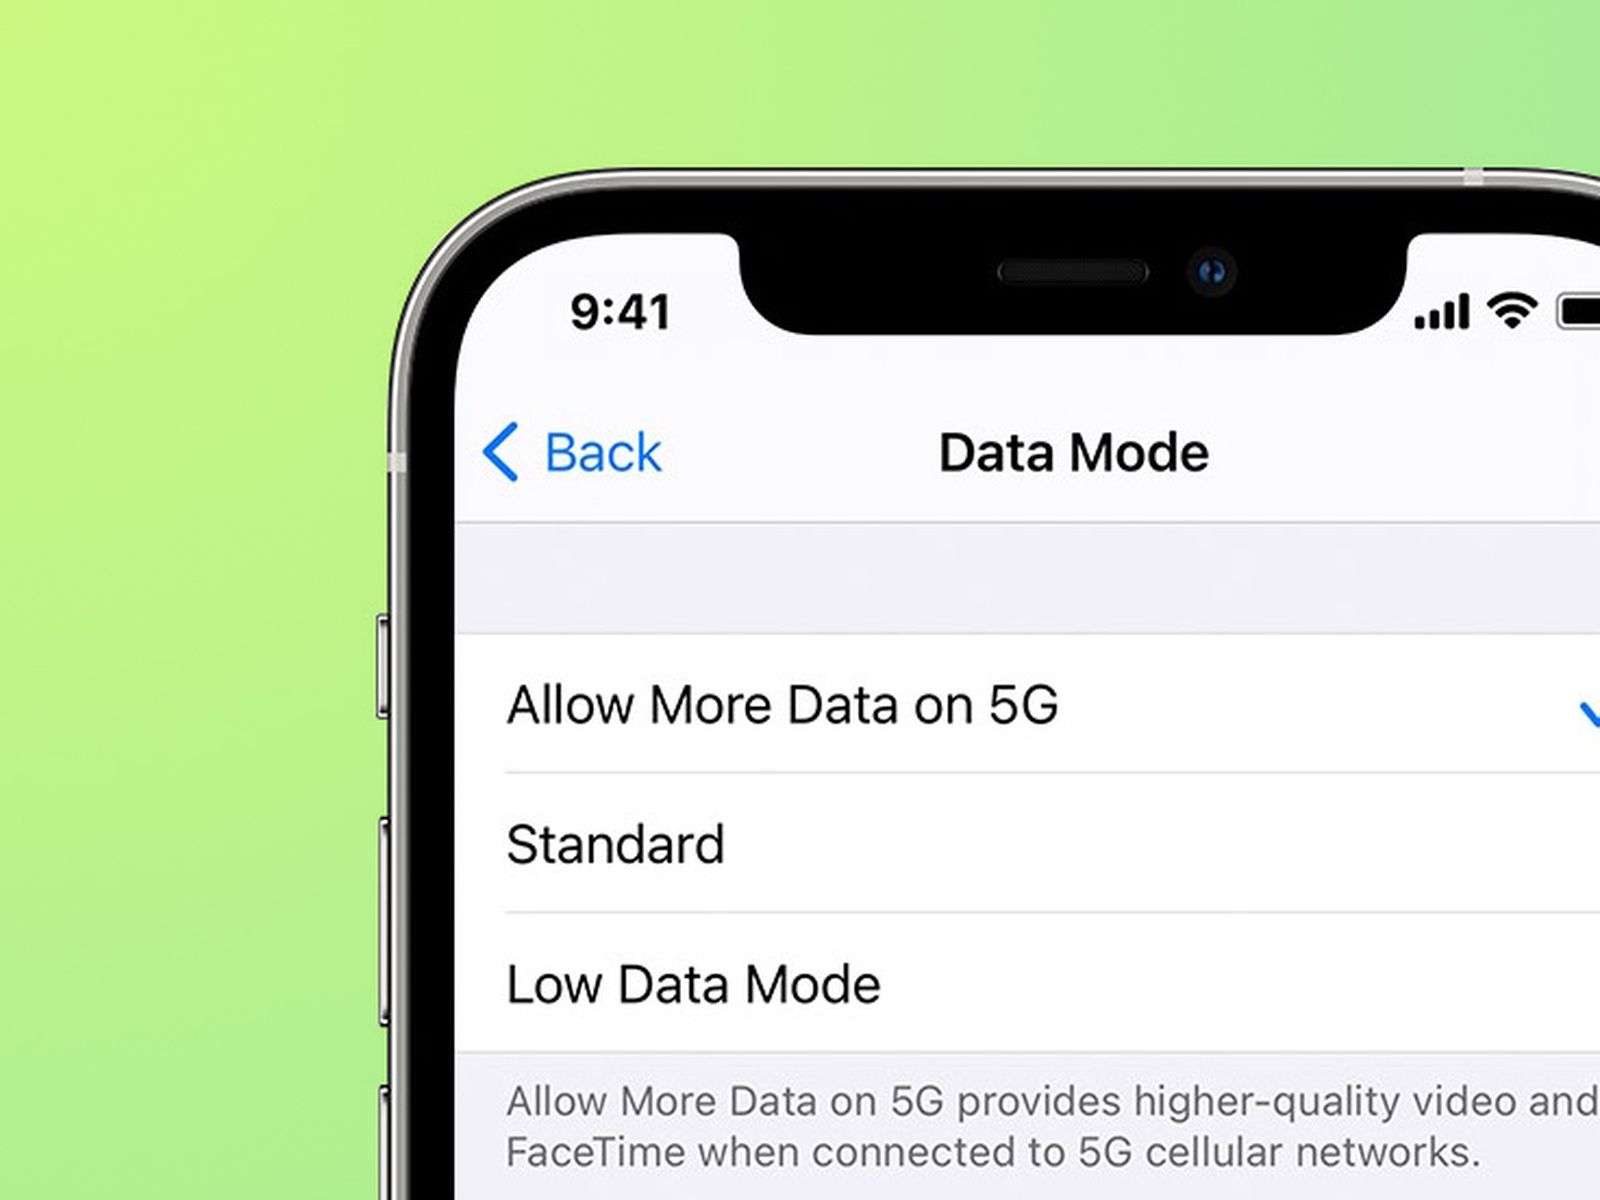 iphone-12-users-can-now-download-os-updates-over-5g-data